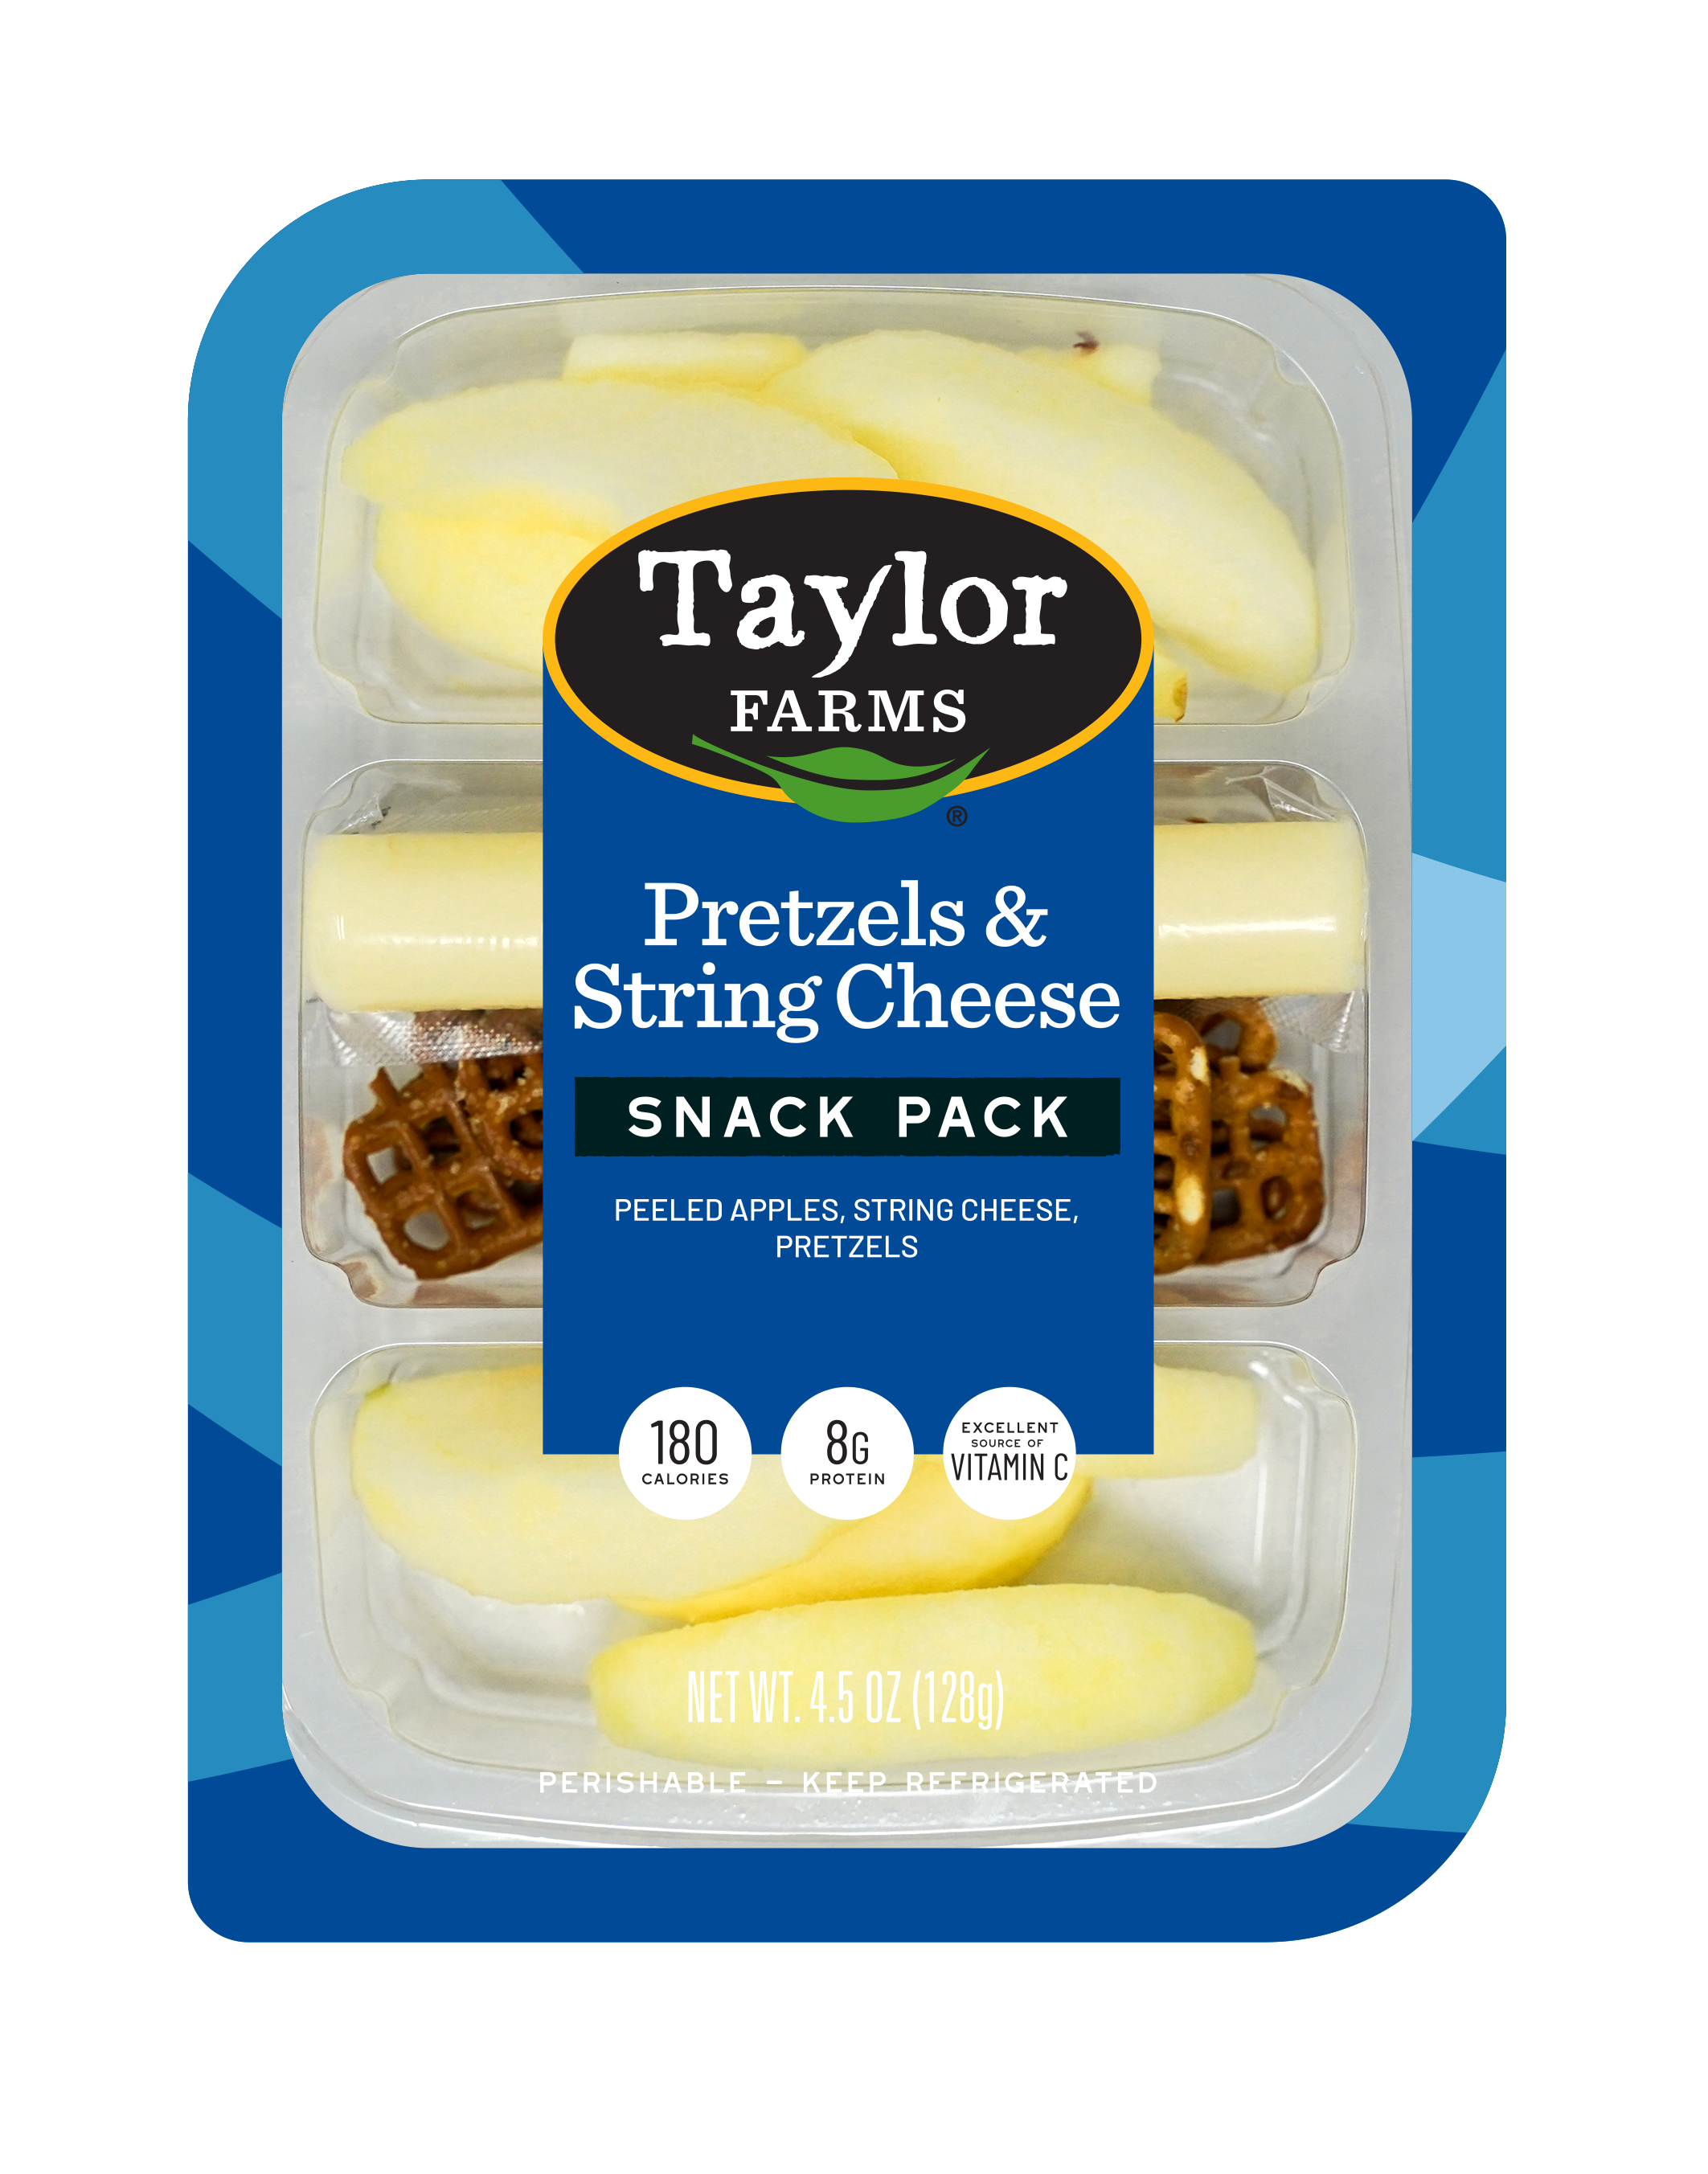 Taylor Farms Pretzels & String Cheese Snack Pack